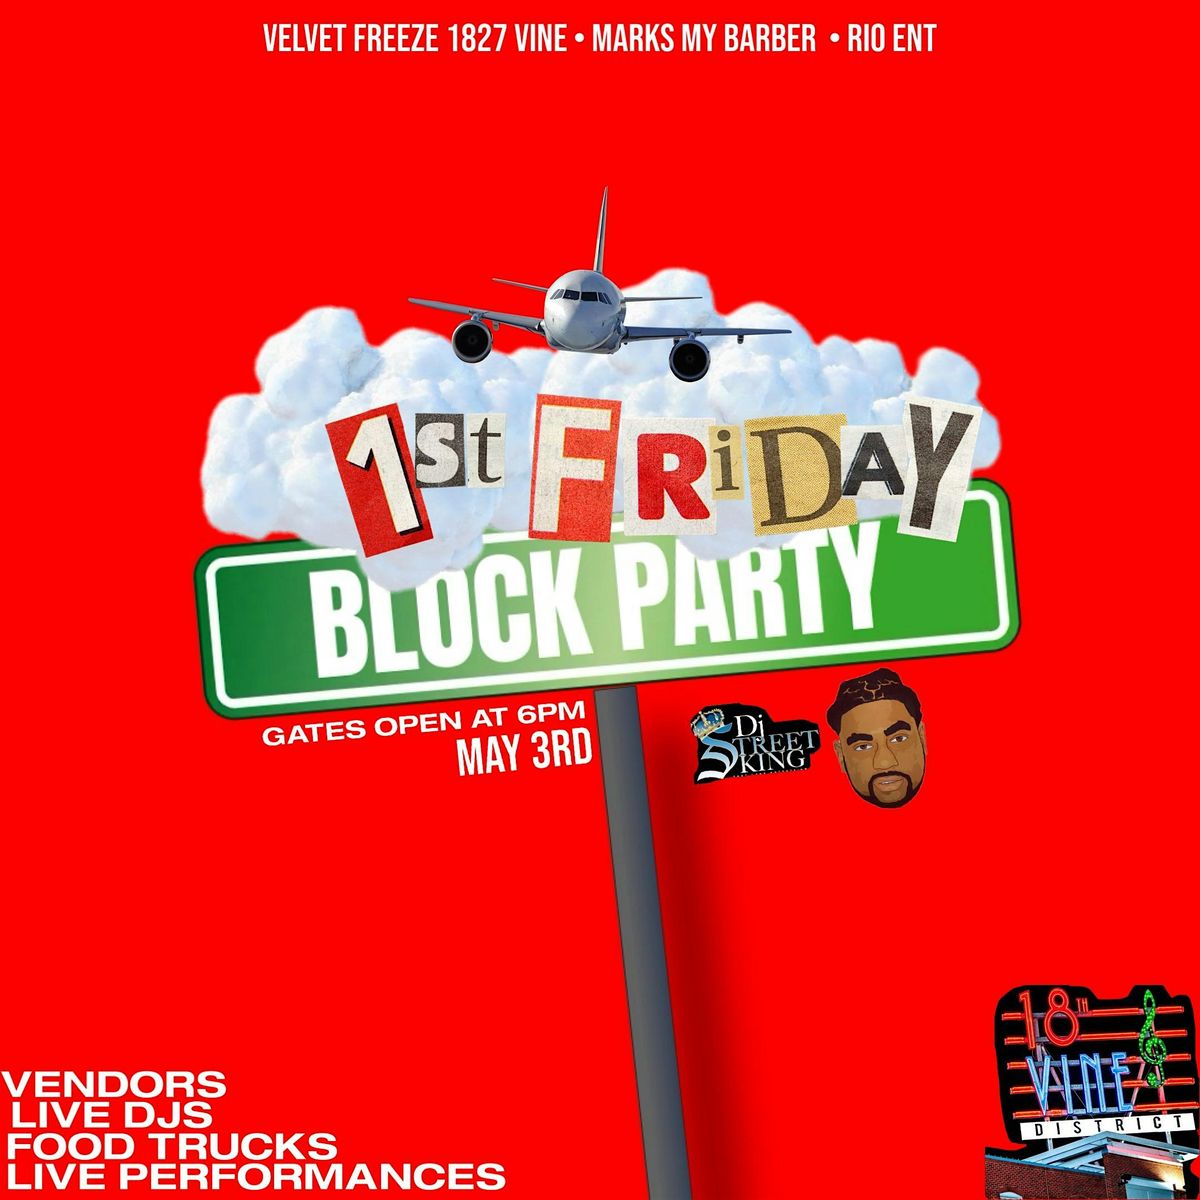 FIRST FRIDAY BLOCK PARTY ON THE VINE